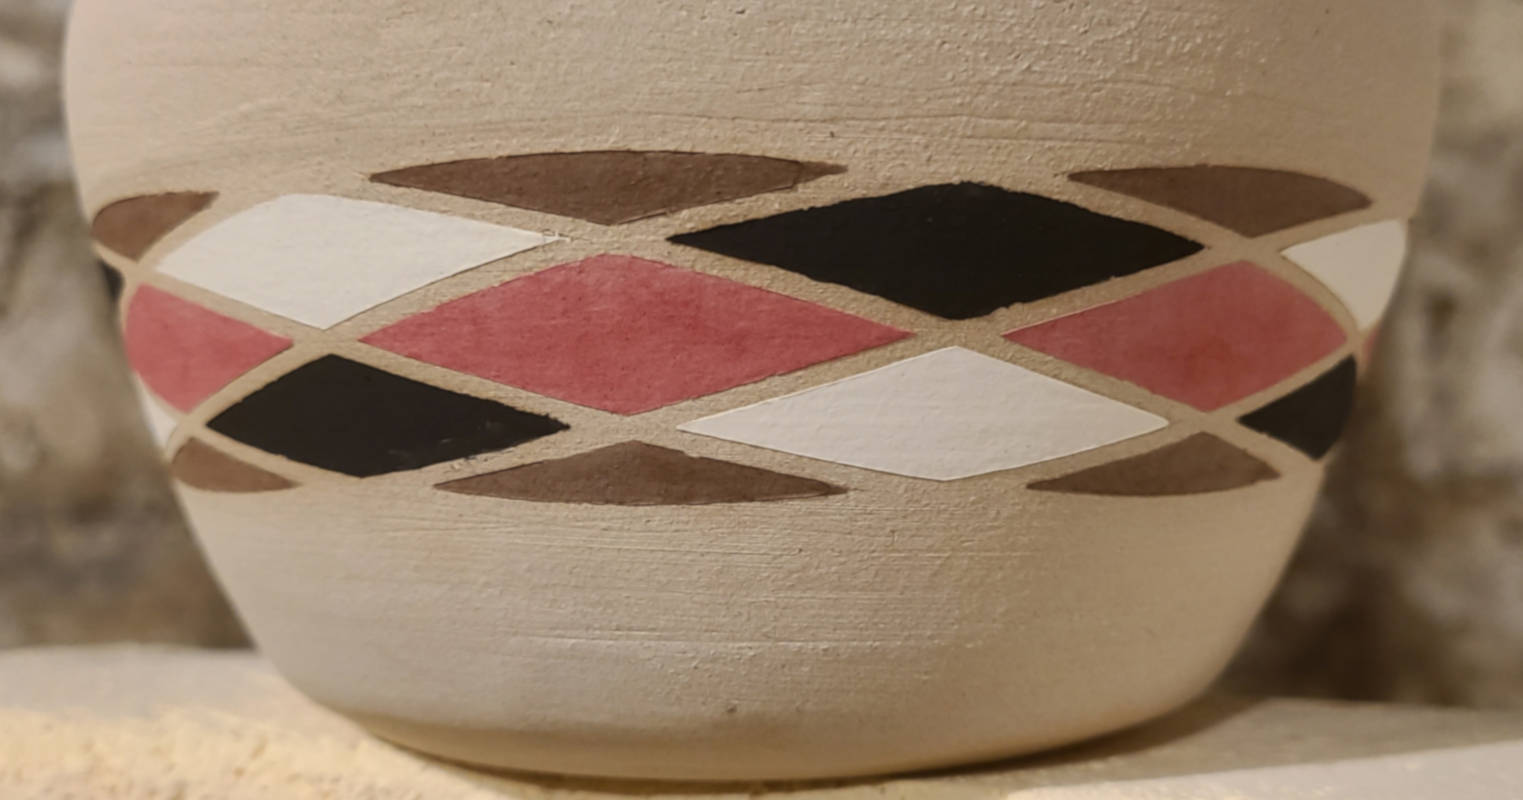 Completed bisqueware vase with artwork around the conical circumference